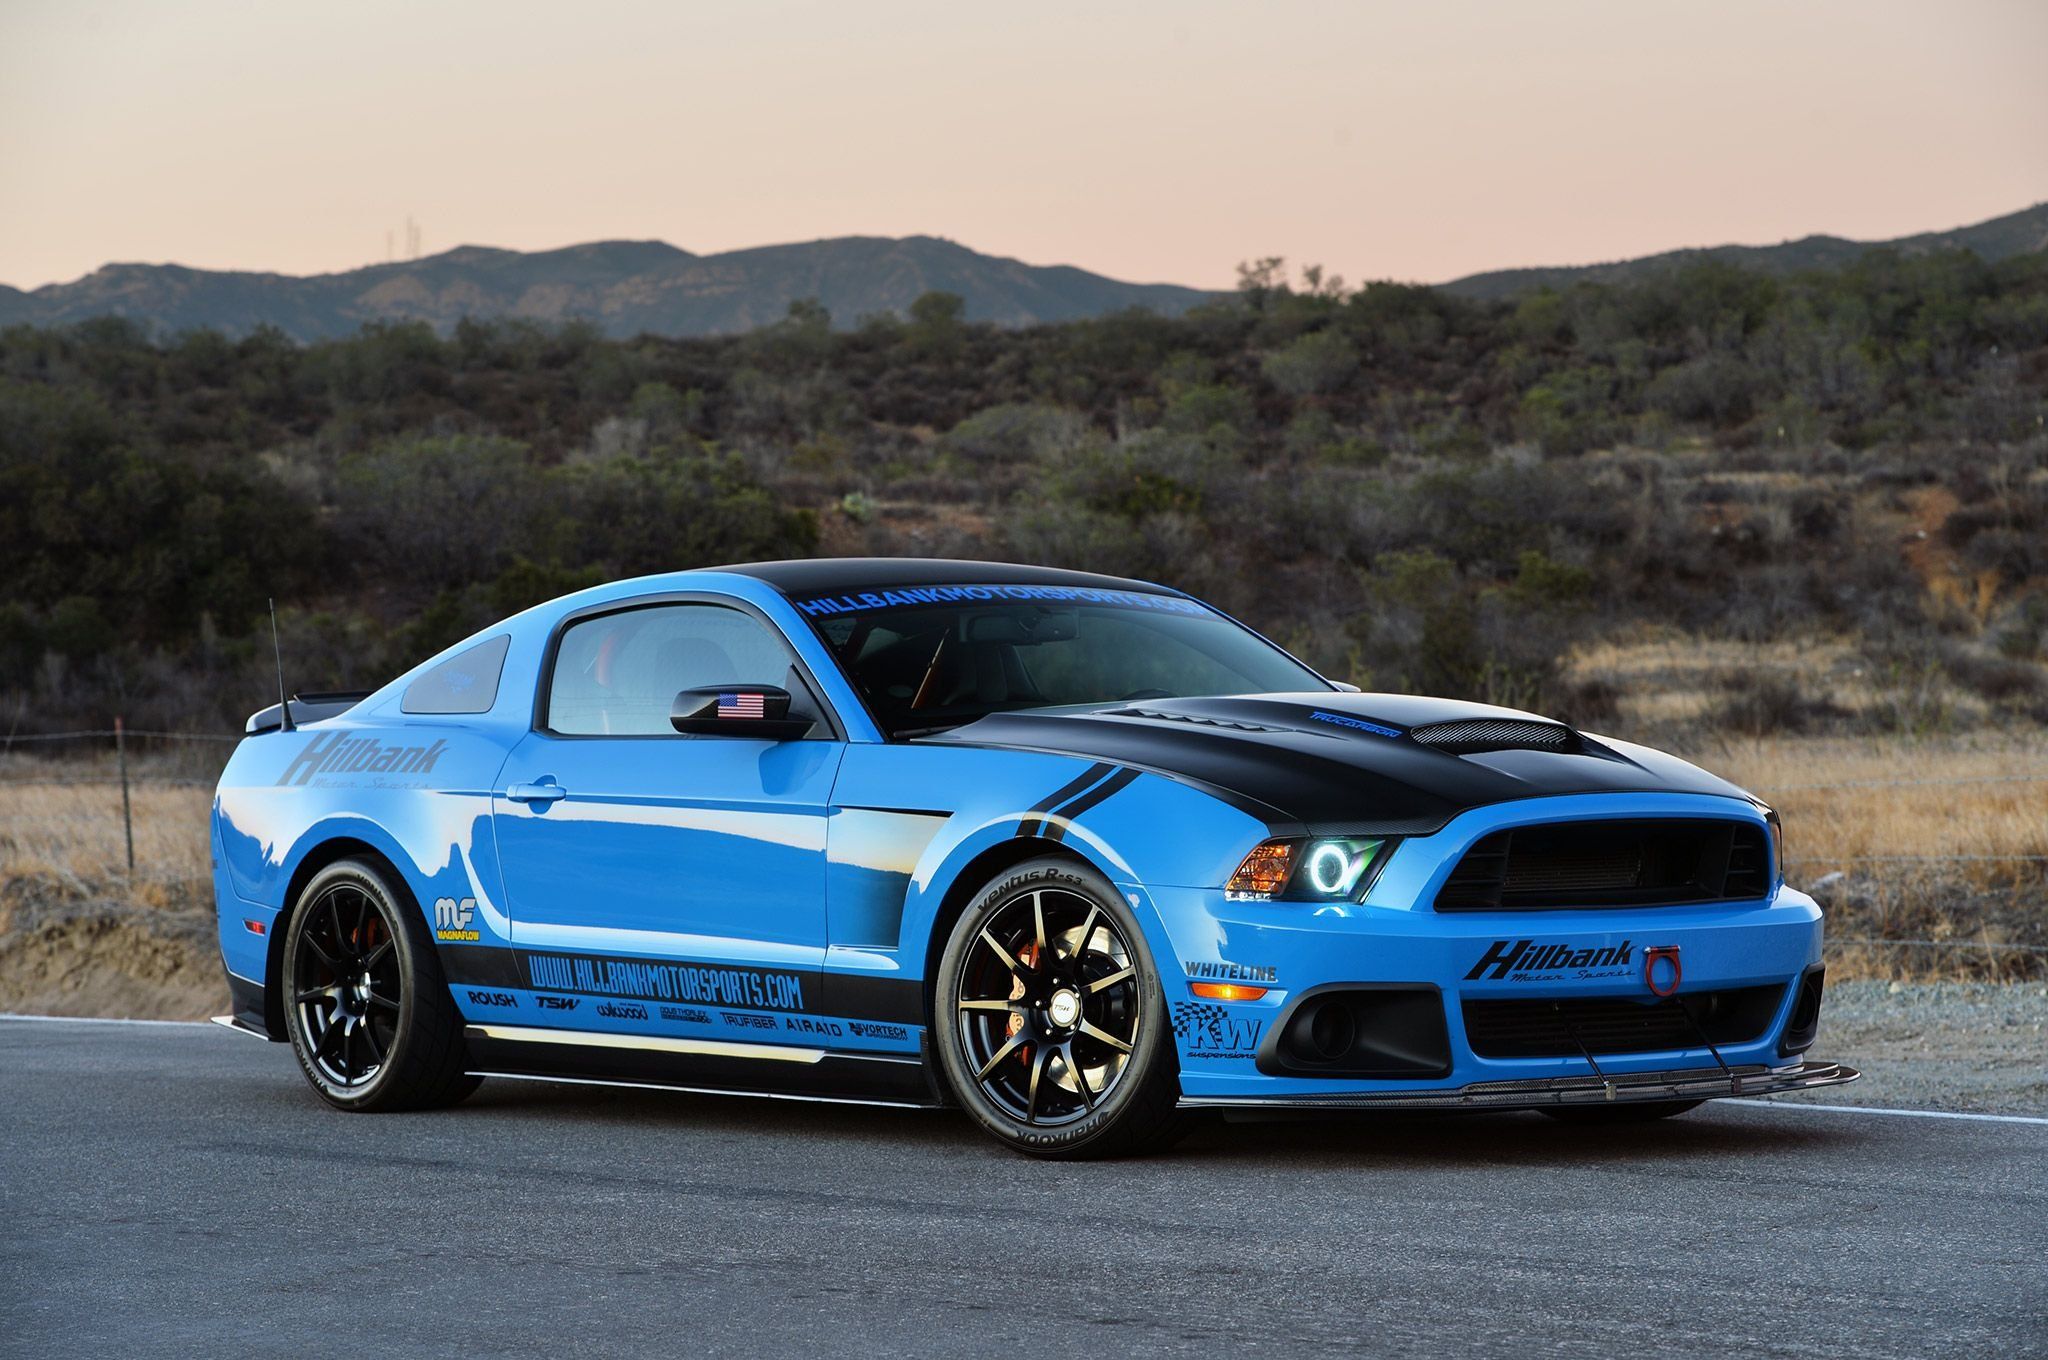 modified, Grabber, Blue, Ford, Mustang, Gt, Cars Wallpaper HD / Desktop and Mobile Background